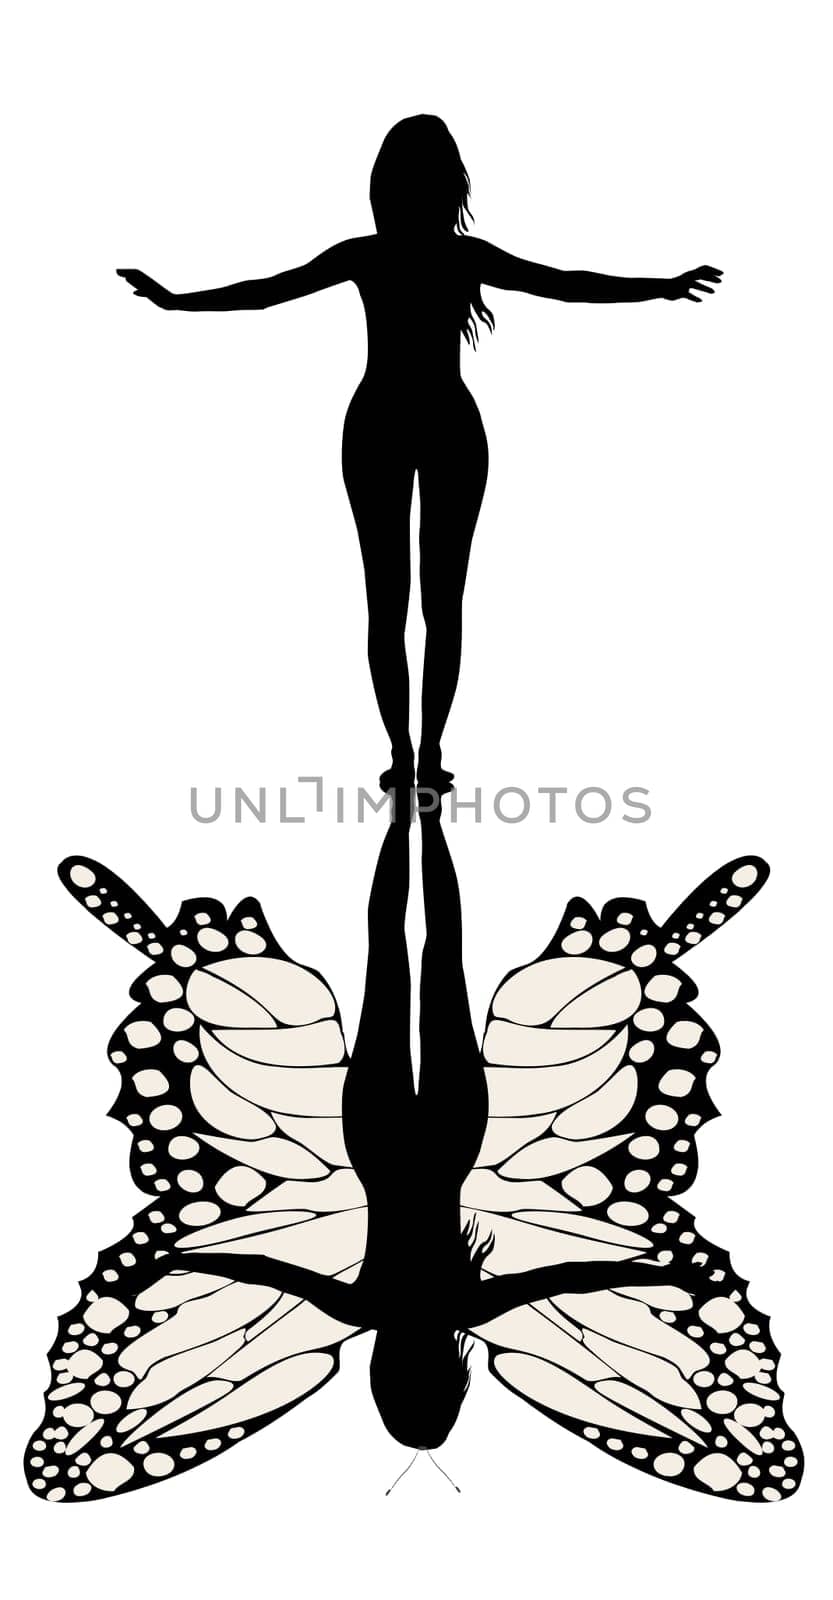 Woman silhouette with realistic butterfly shadow by hibrida13